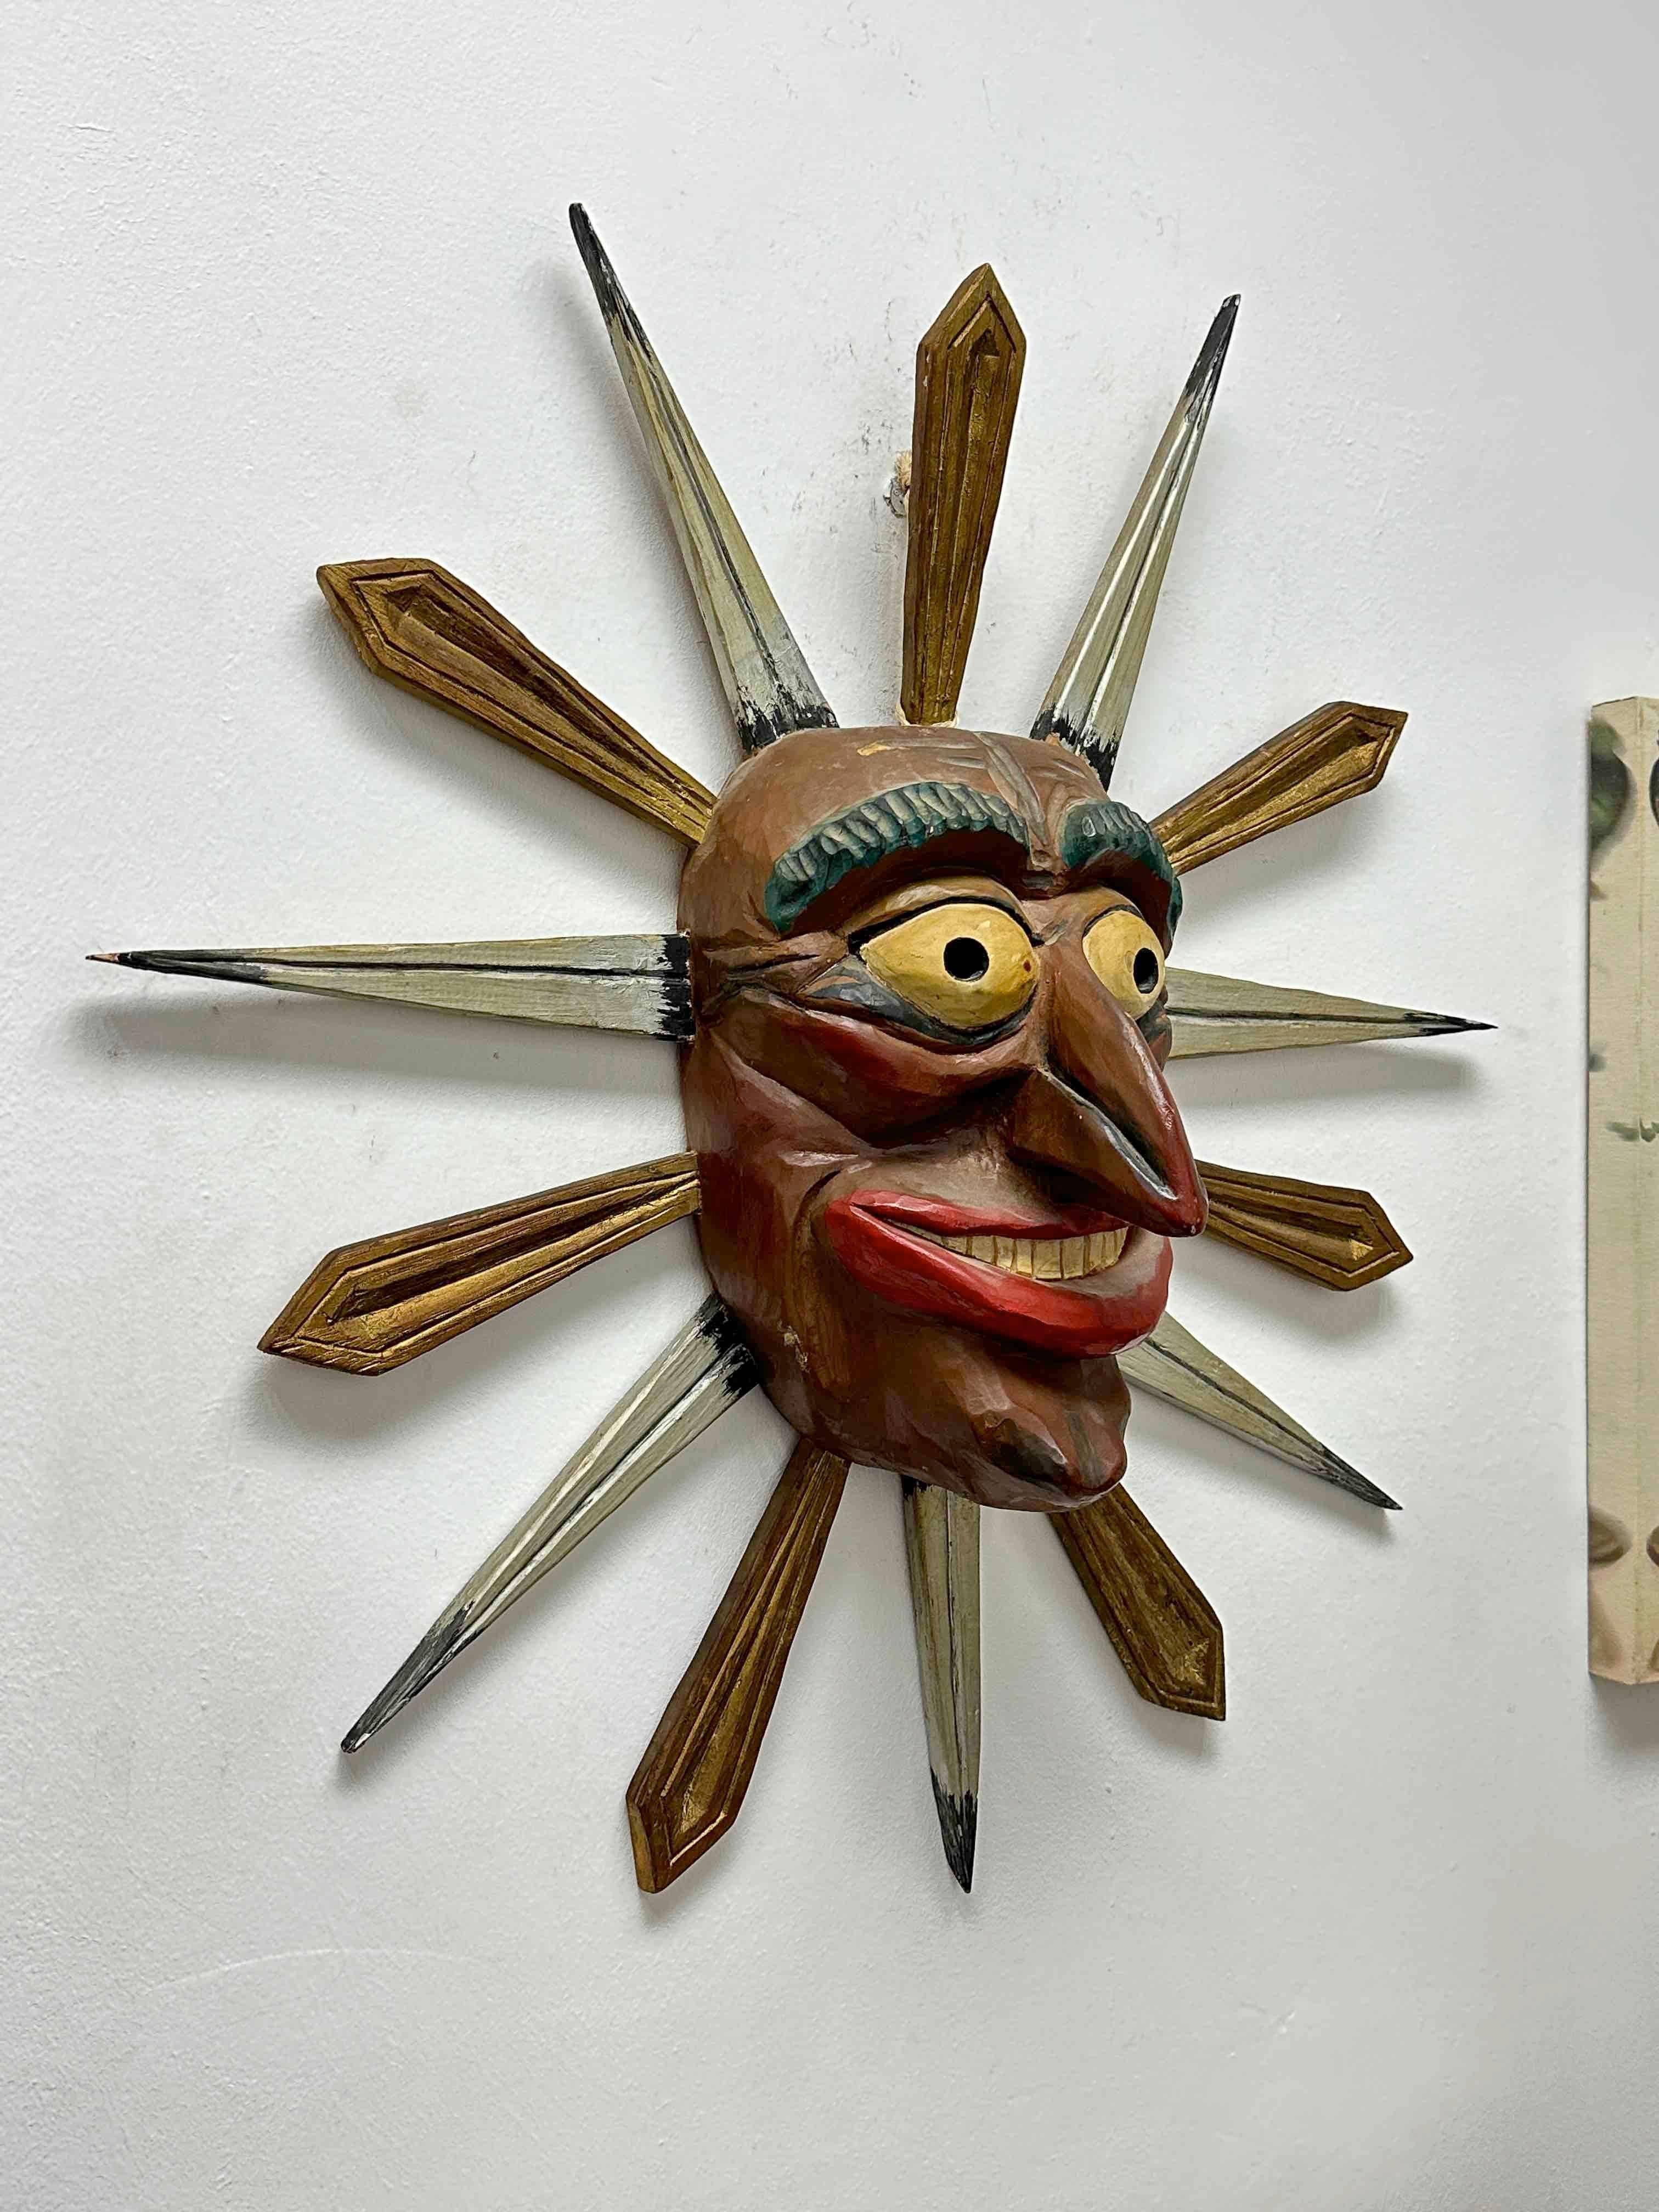 Beautiful black forest Folk Art wood carved mask. This is a wonderful example of black forest carving. This can be used as a Wall decoration or as a wearable mask. Found at an estate sale in Innsbruck, Austria. These are used at the carnival or